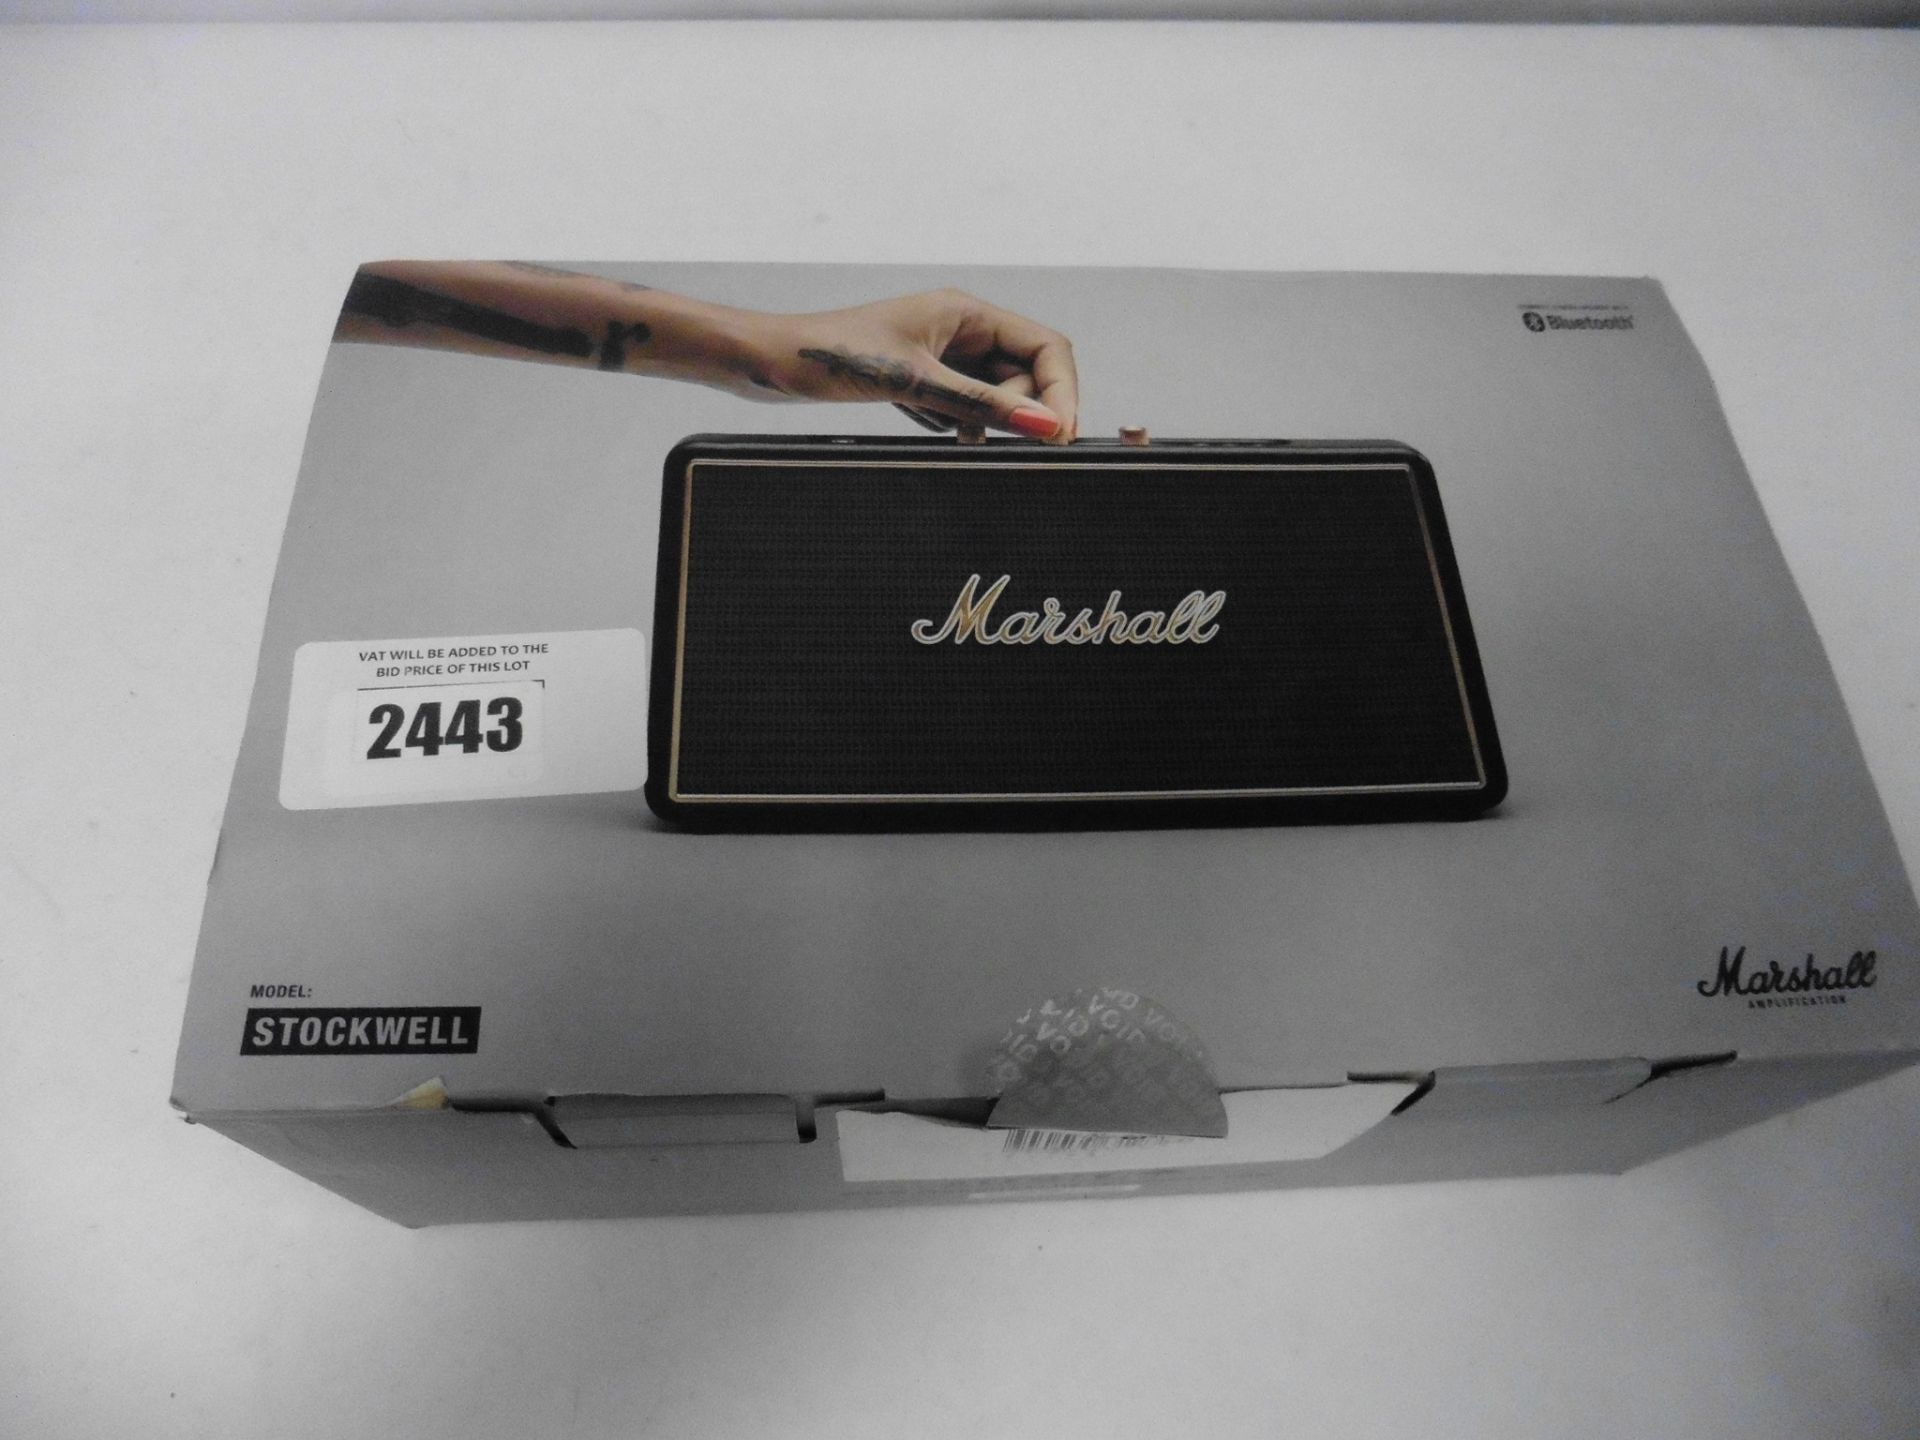 Marshall Stockwell bluetooth portable speaker and box